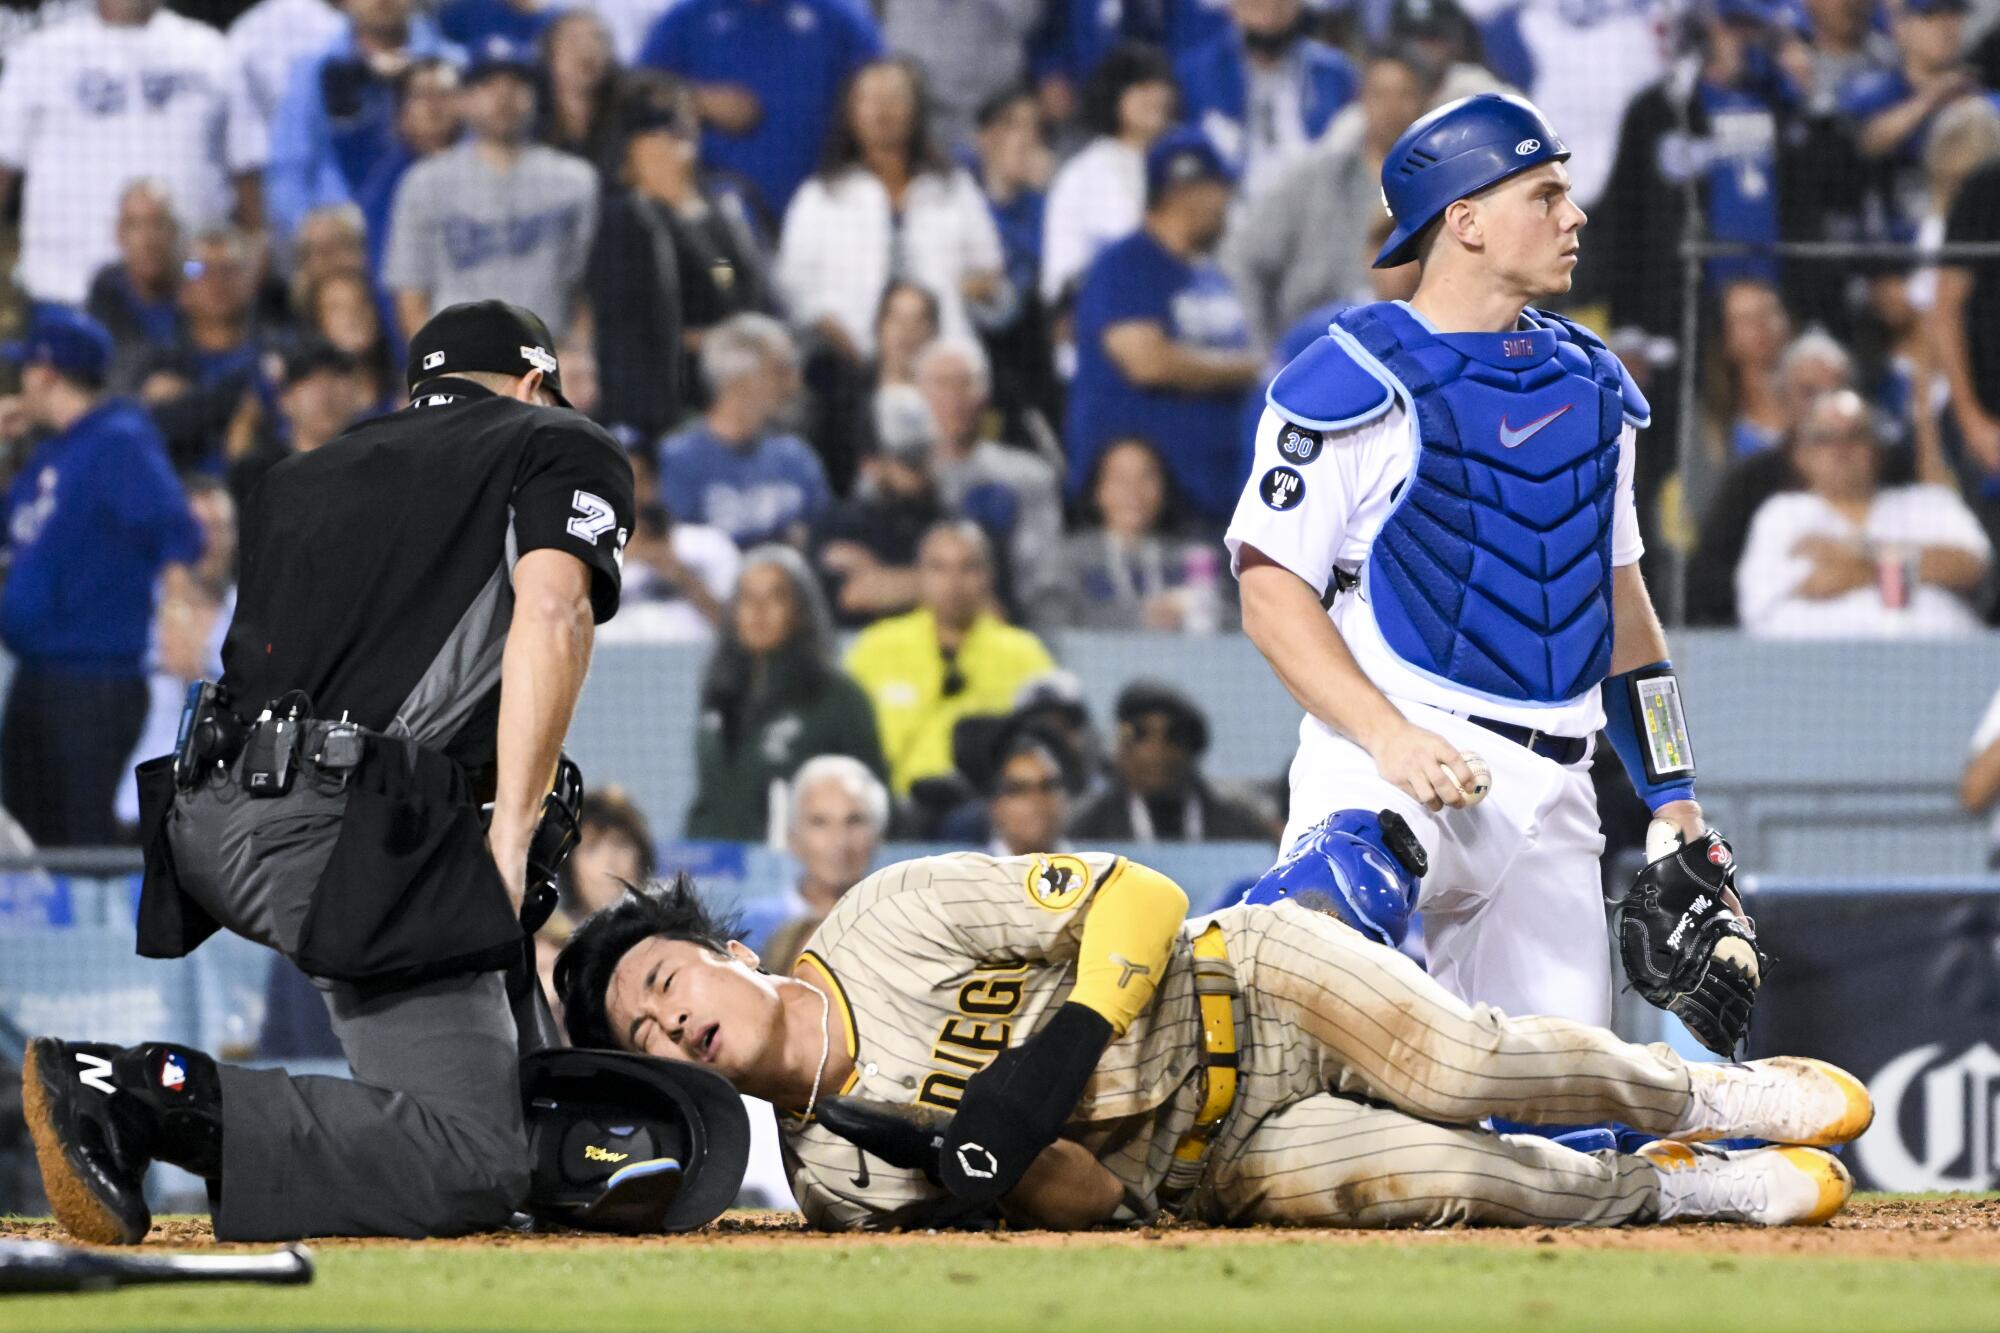 Padres' Ha-Seong Kim grimaces after sliding past Dodgers catcher Will Smith to score a run.